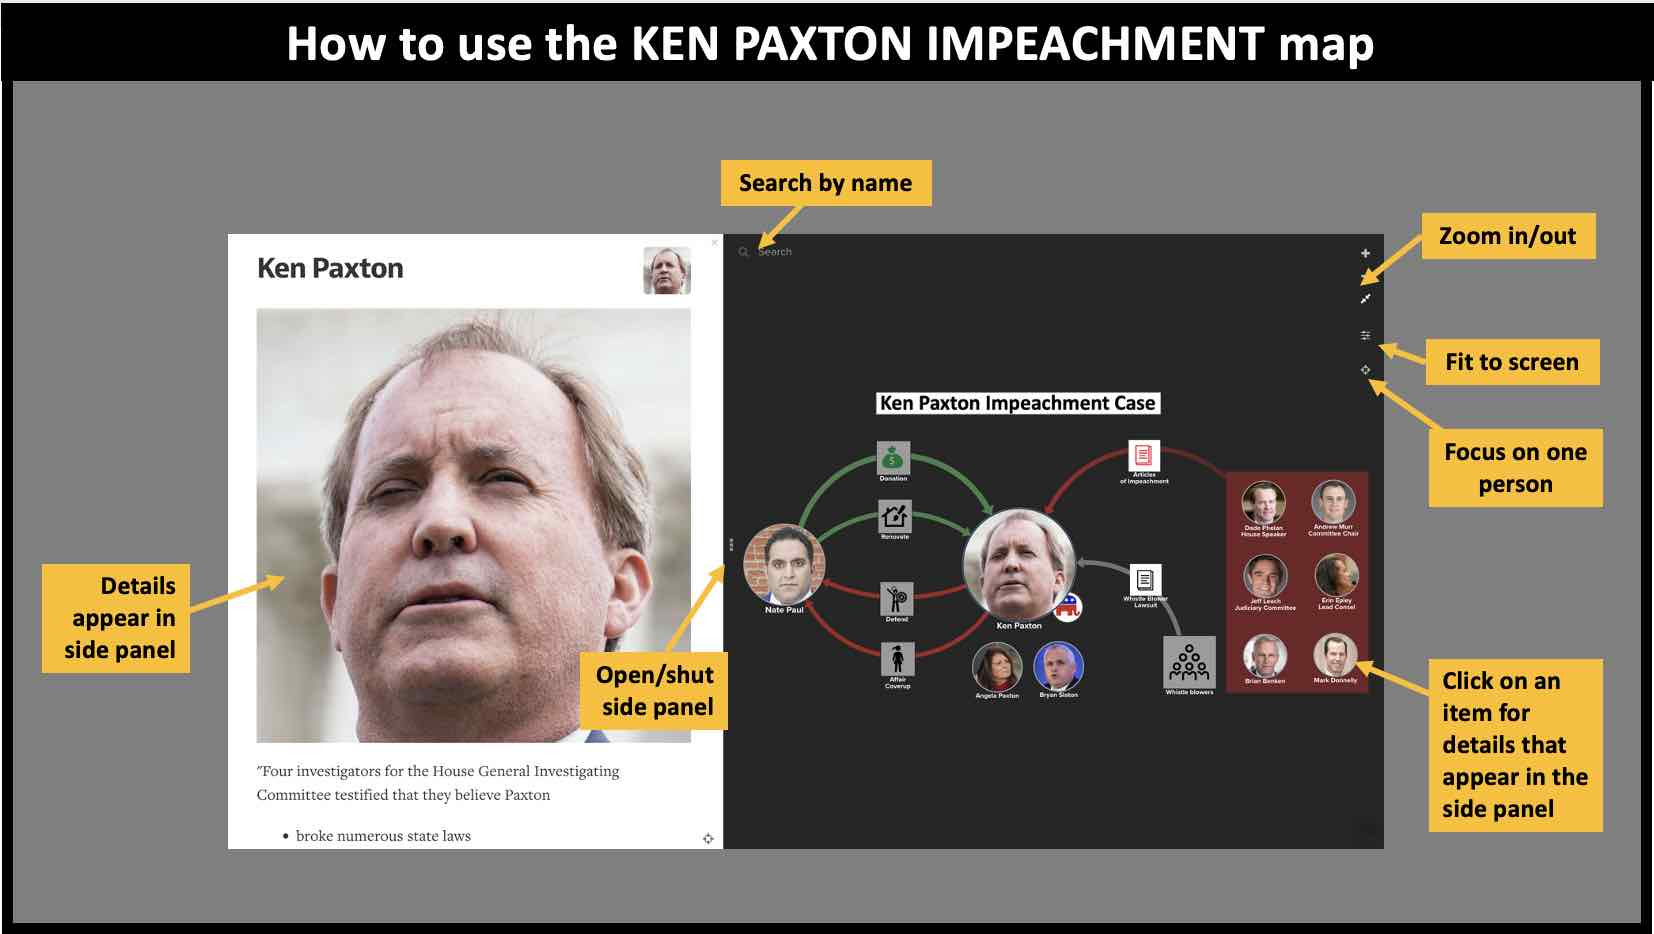 How to use the Ken Paxton impeachment case map